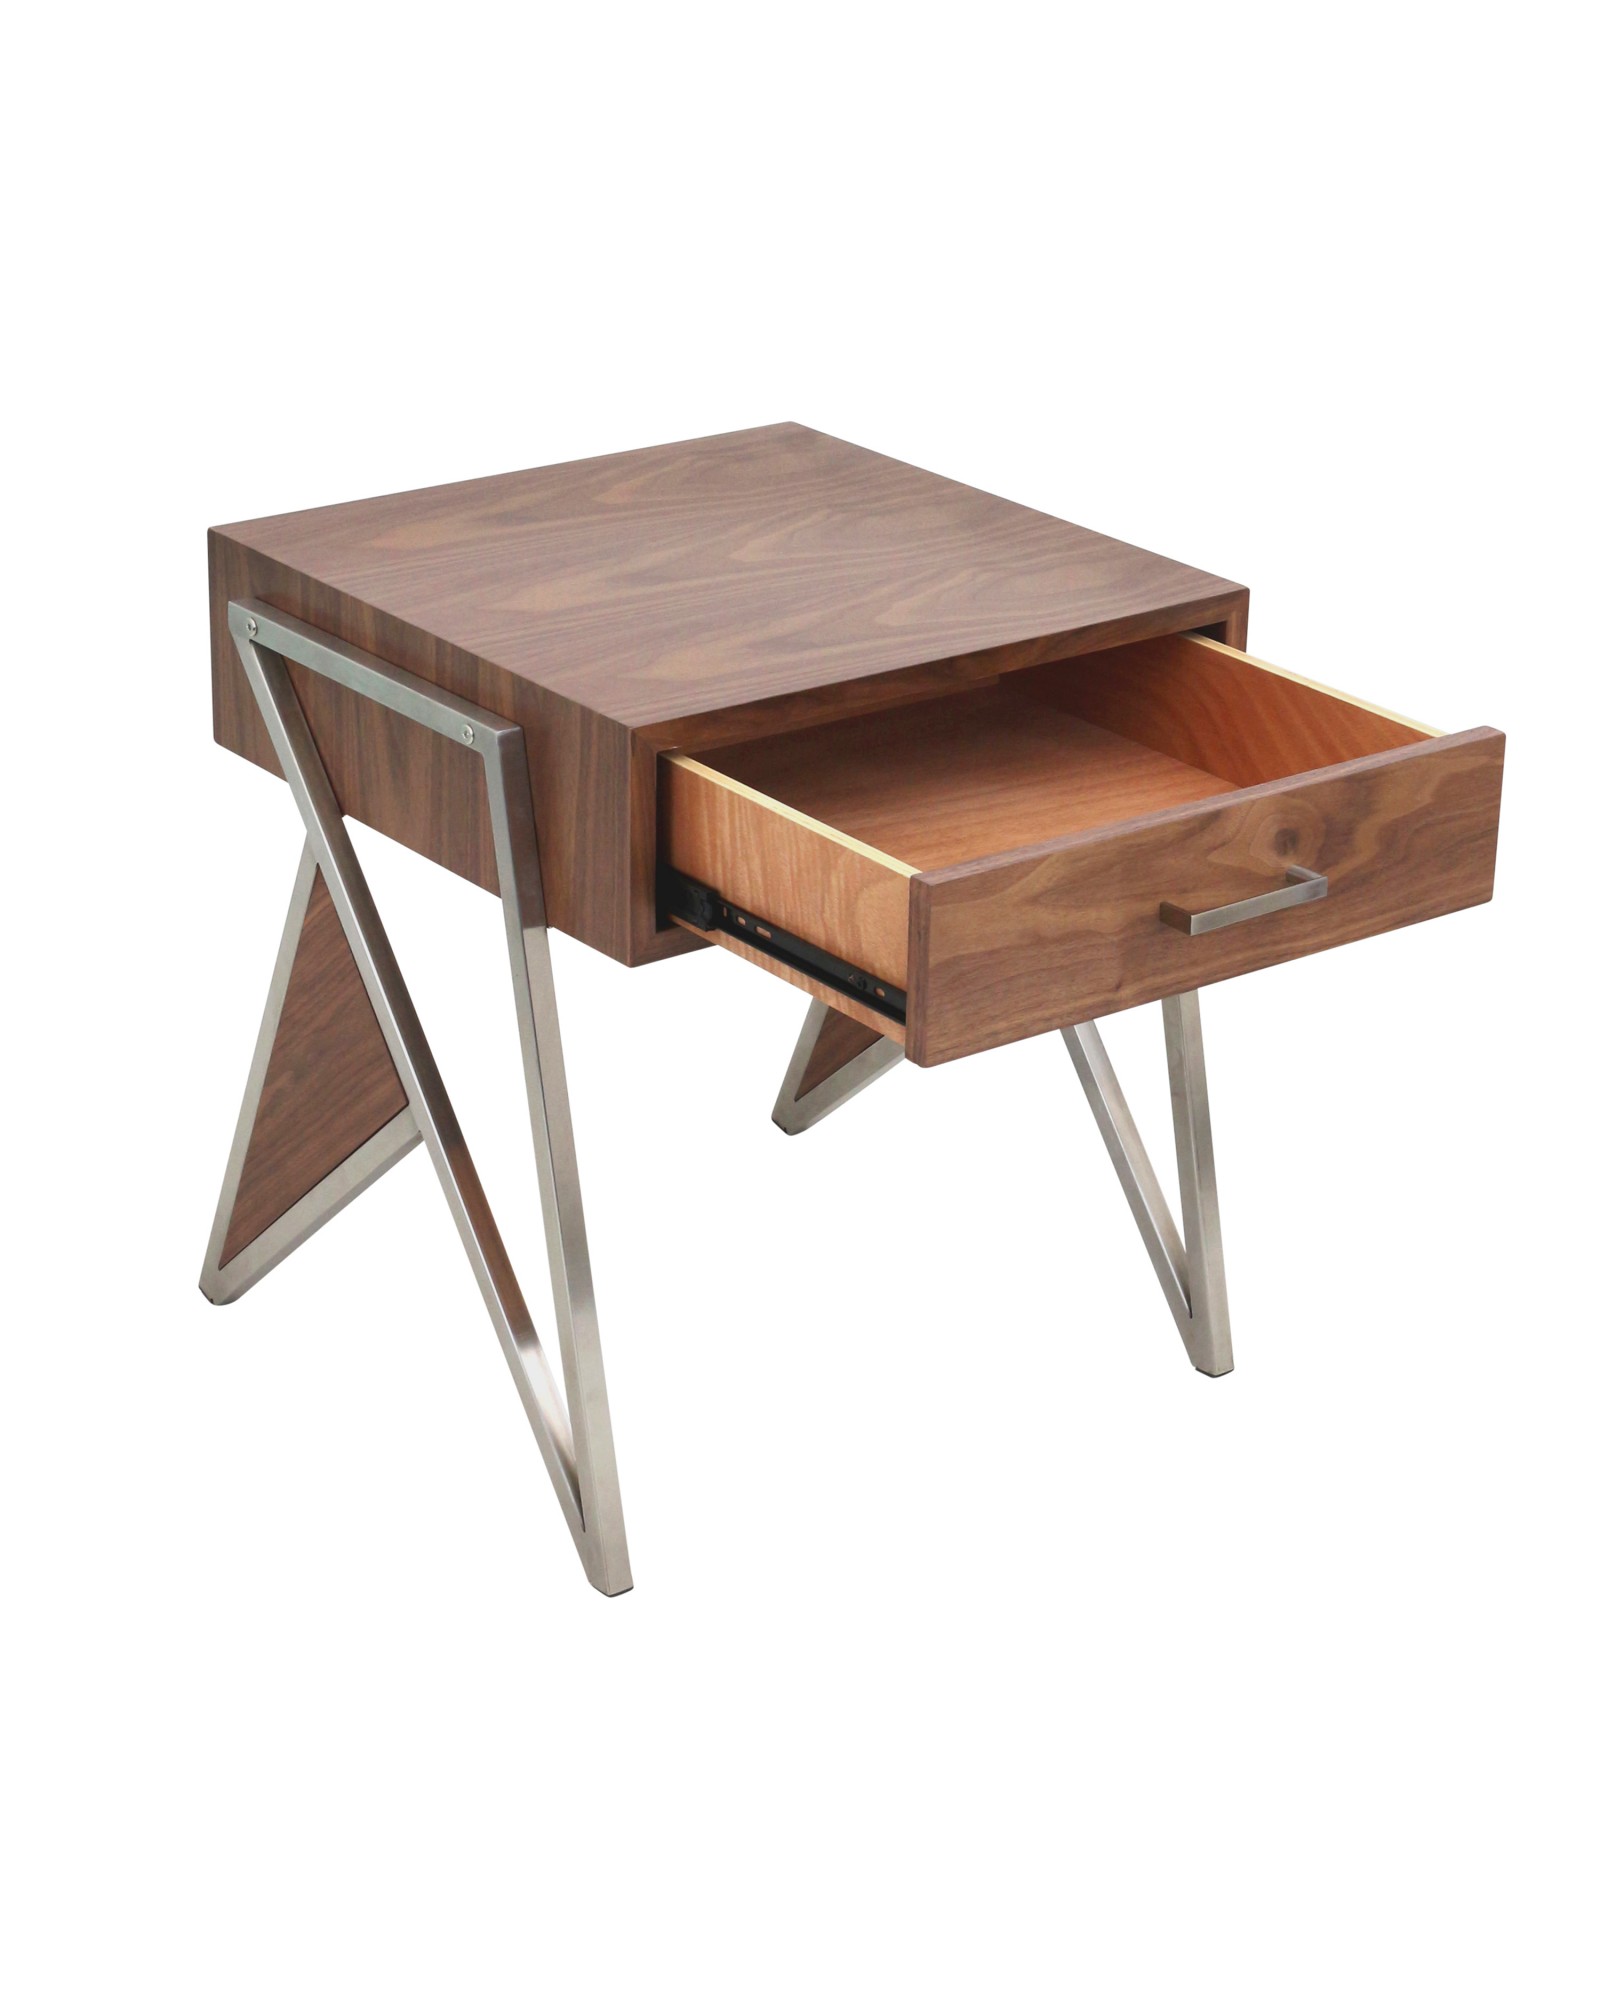 Tetra Contemporary End Table in Walnut Wood and Stainless Steel